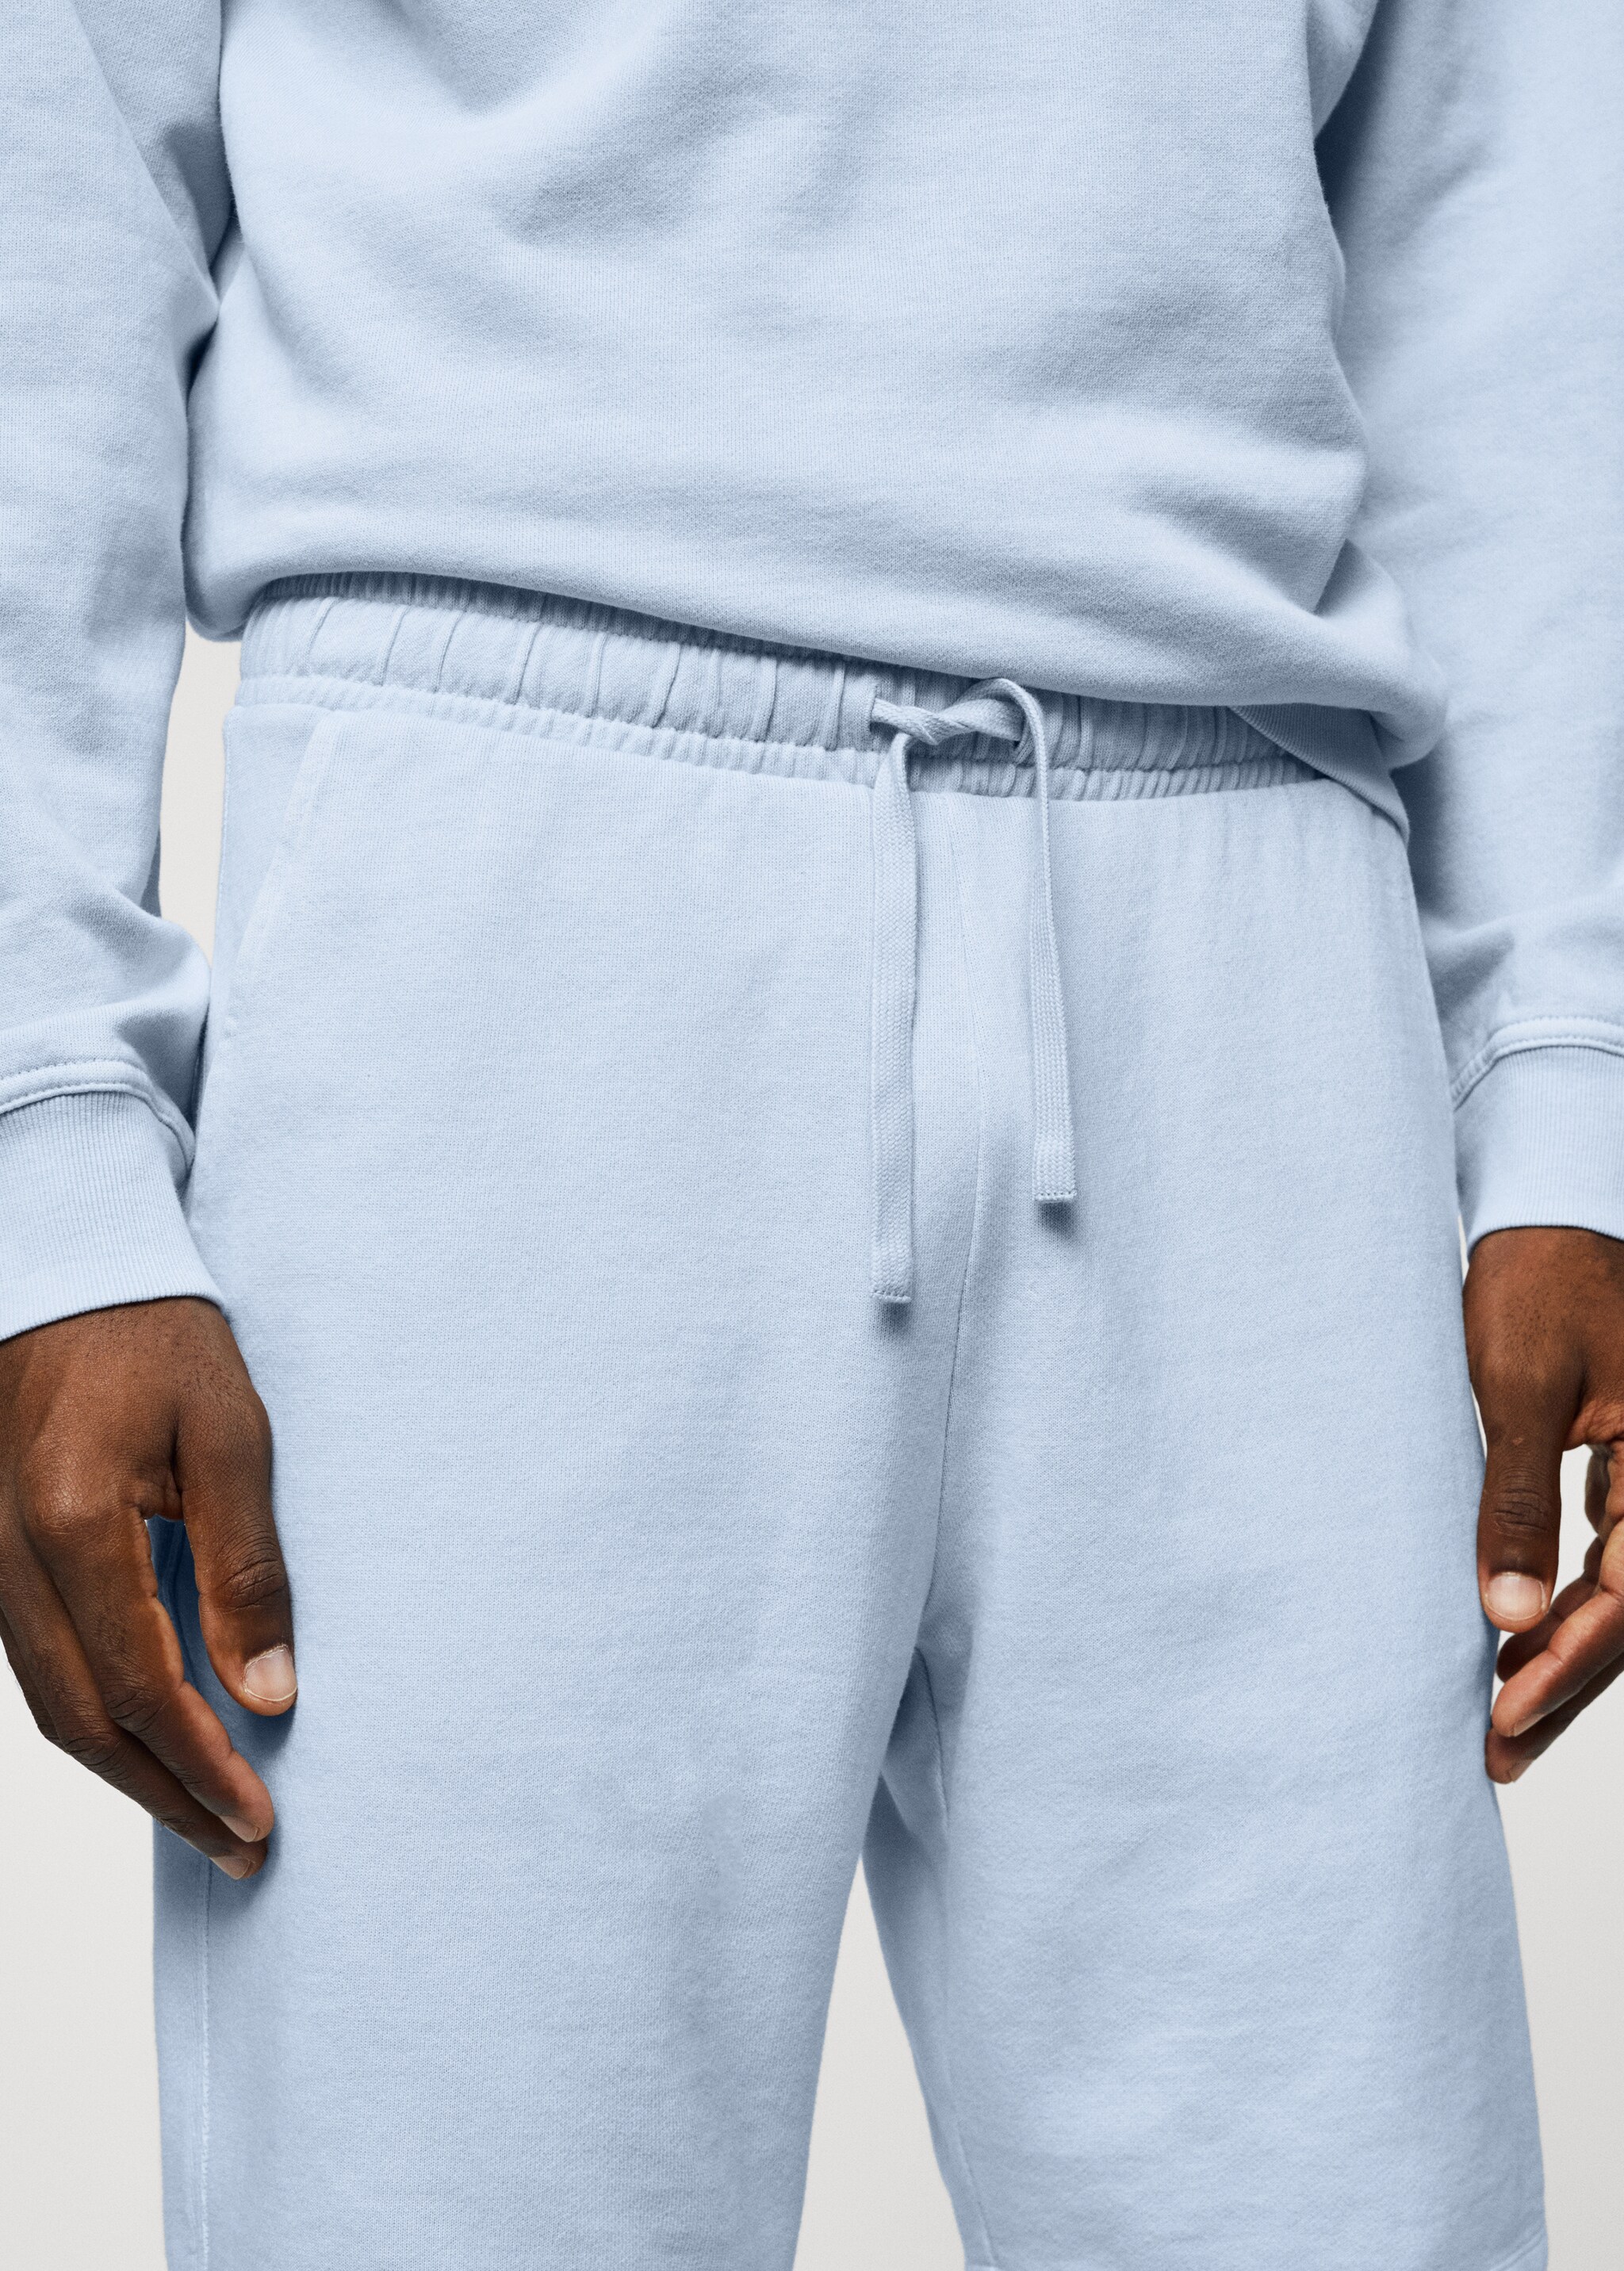 Dyed cotton jogging shorts - Details of the article 1